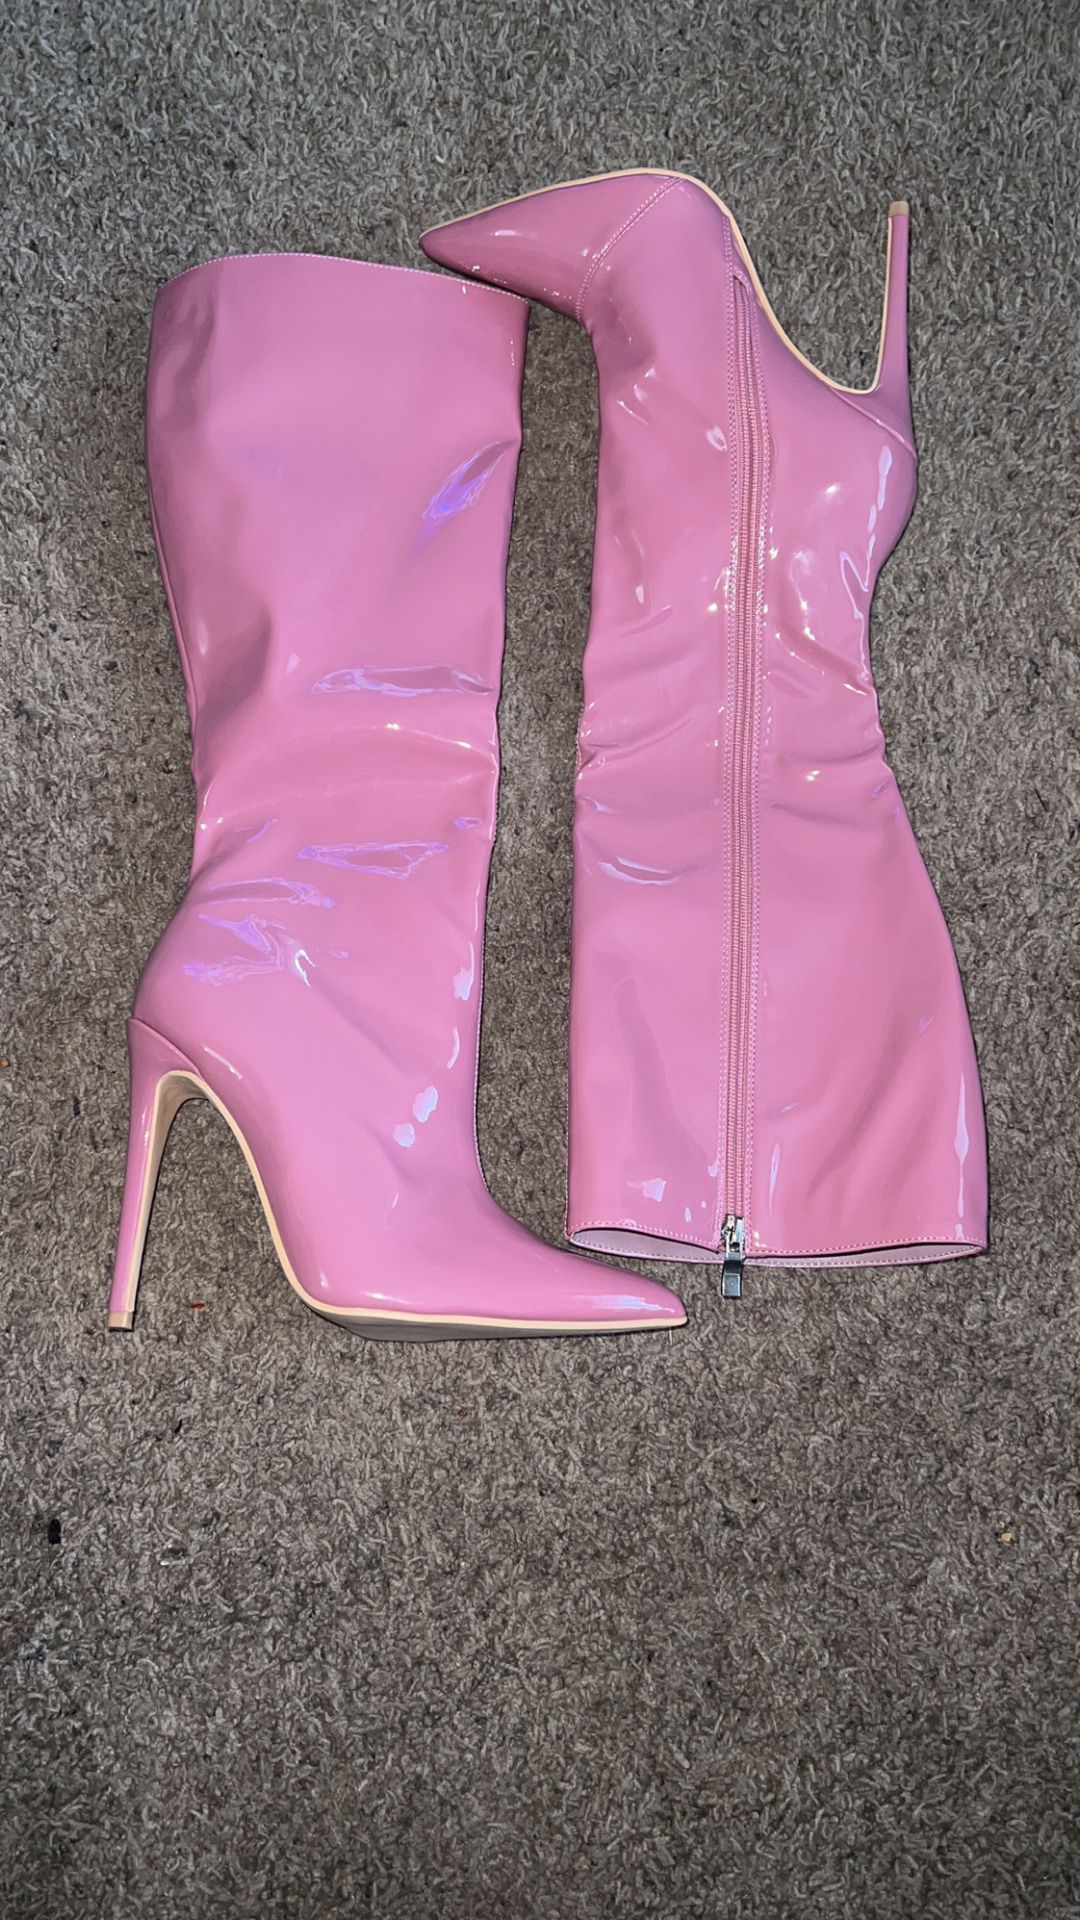 Pink Leather Boots Heel